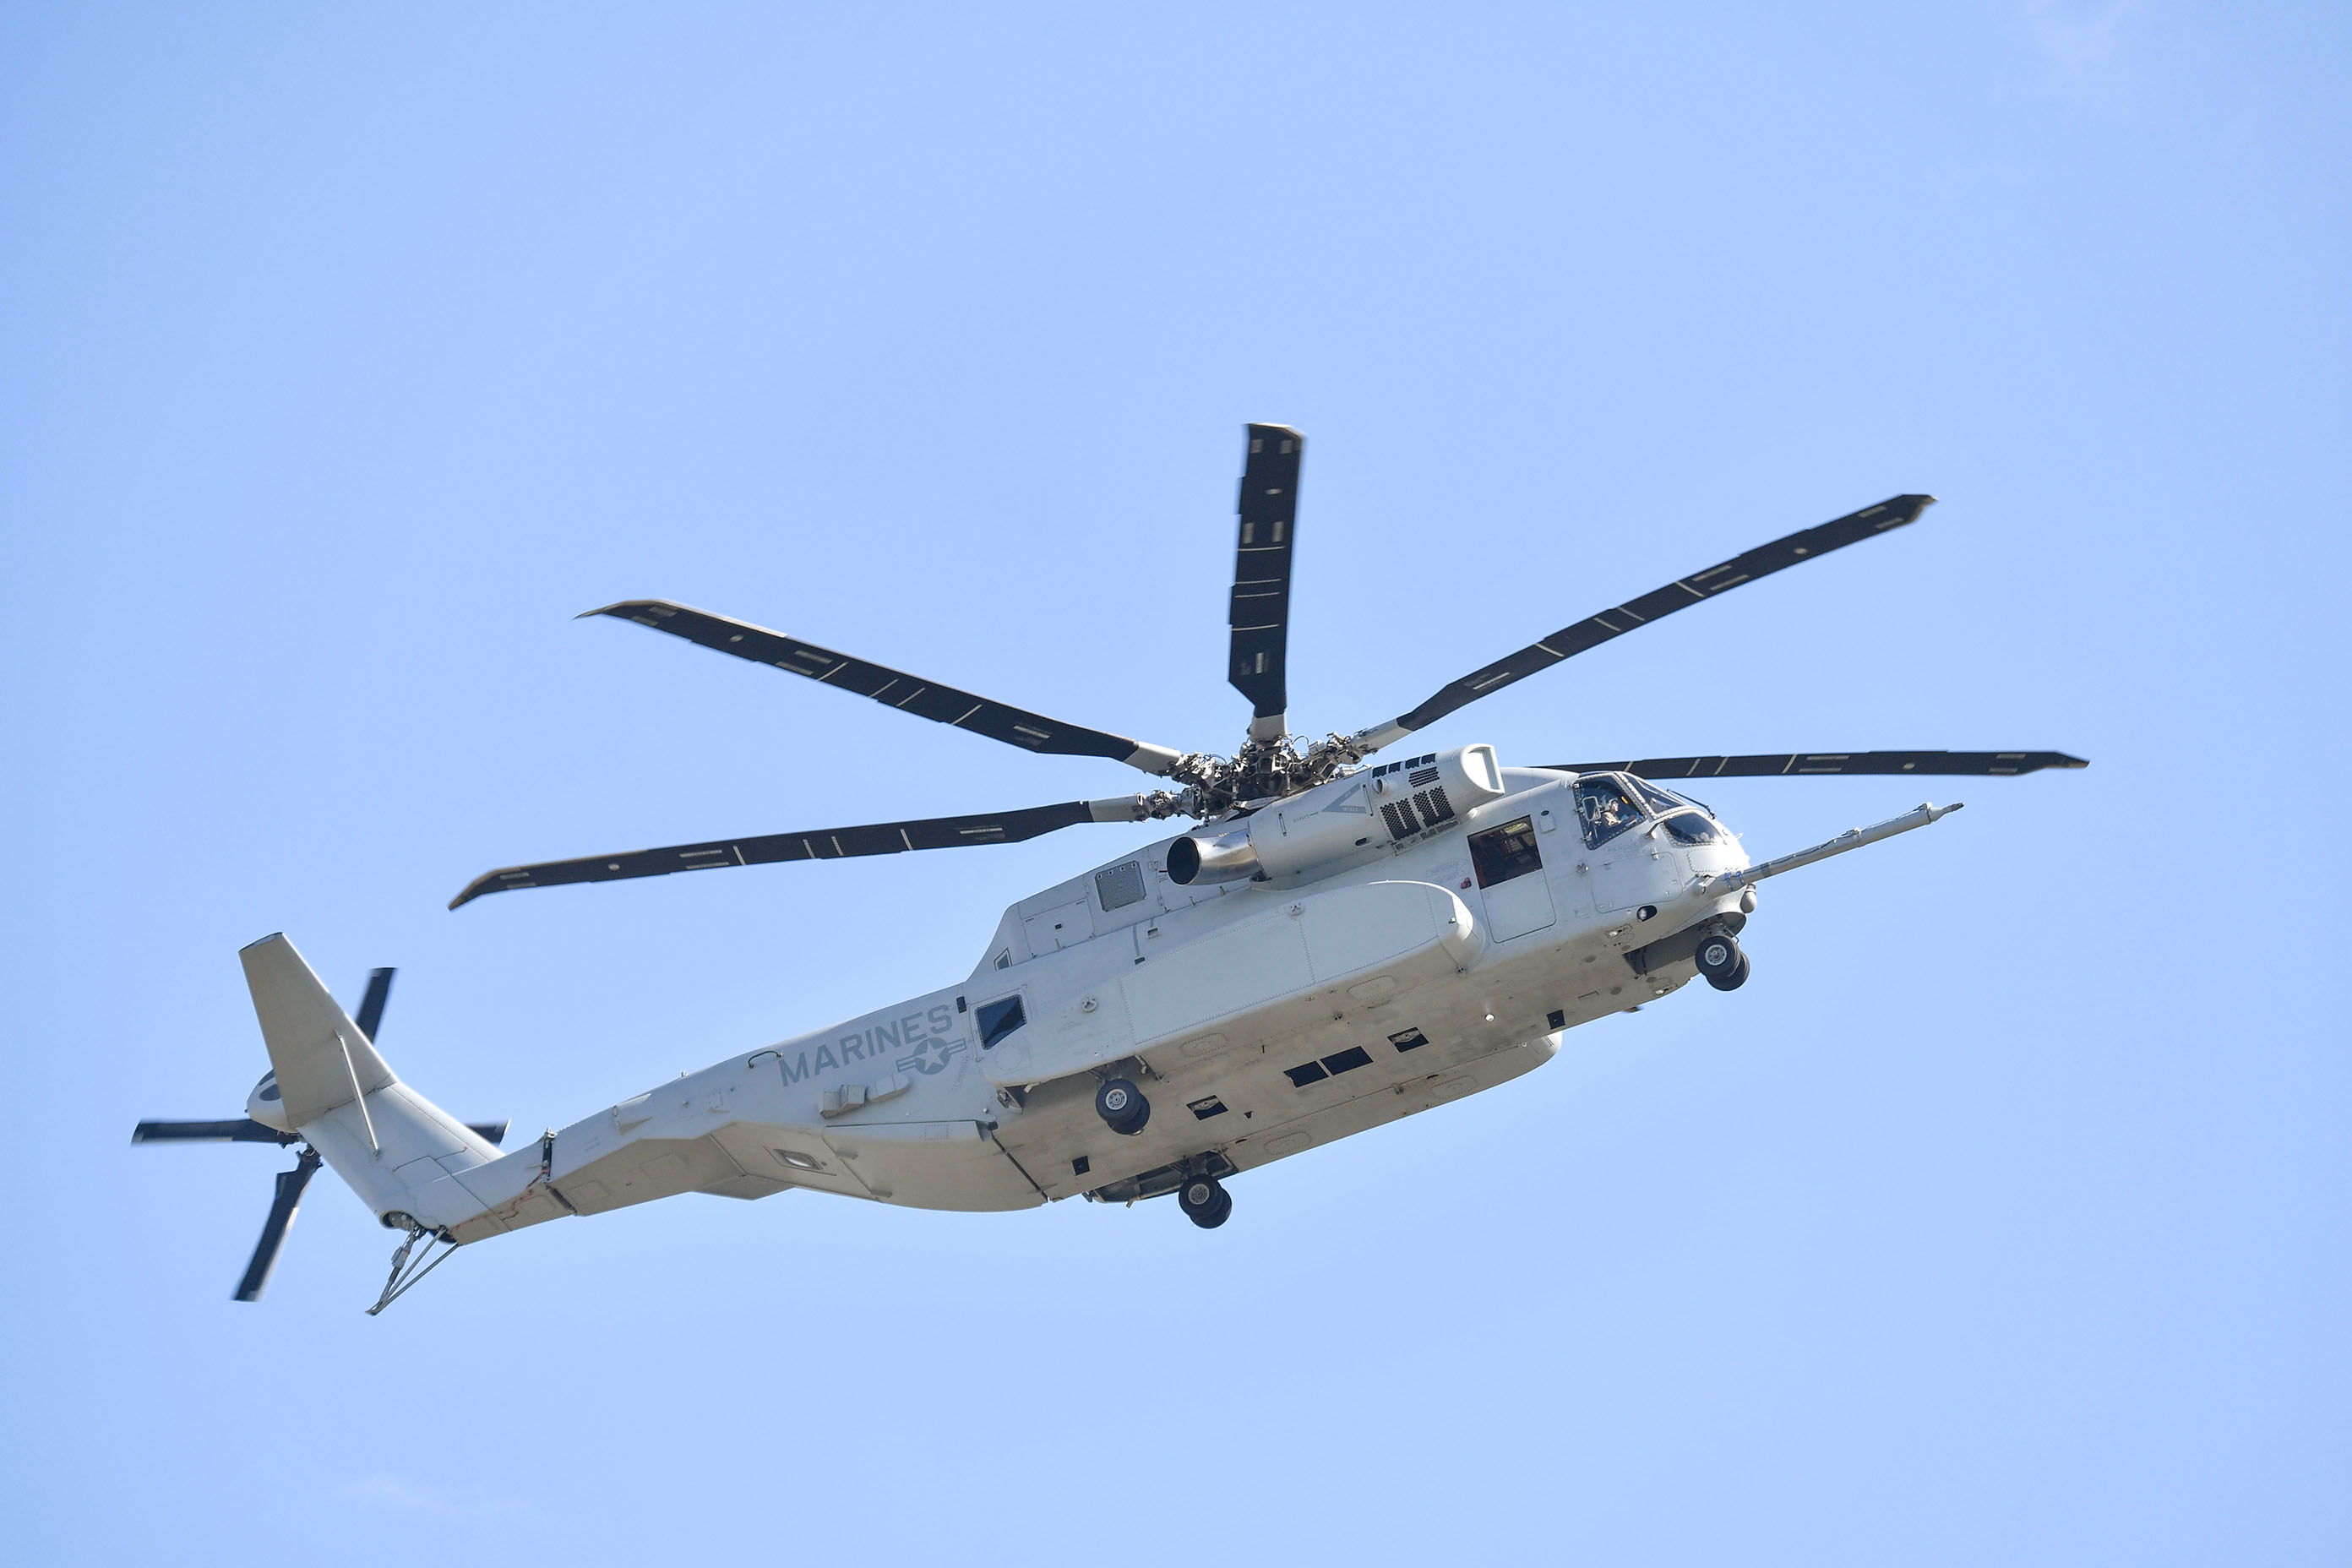 A Sikorsky CH-53K King Stallion heavy-lift cargo helicopter